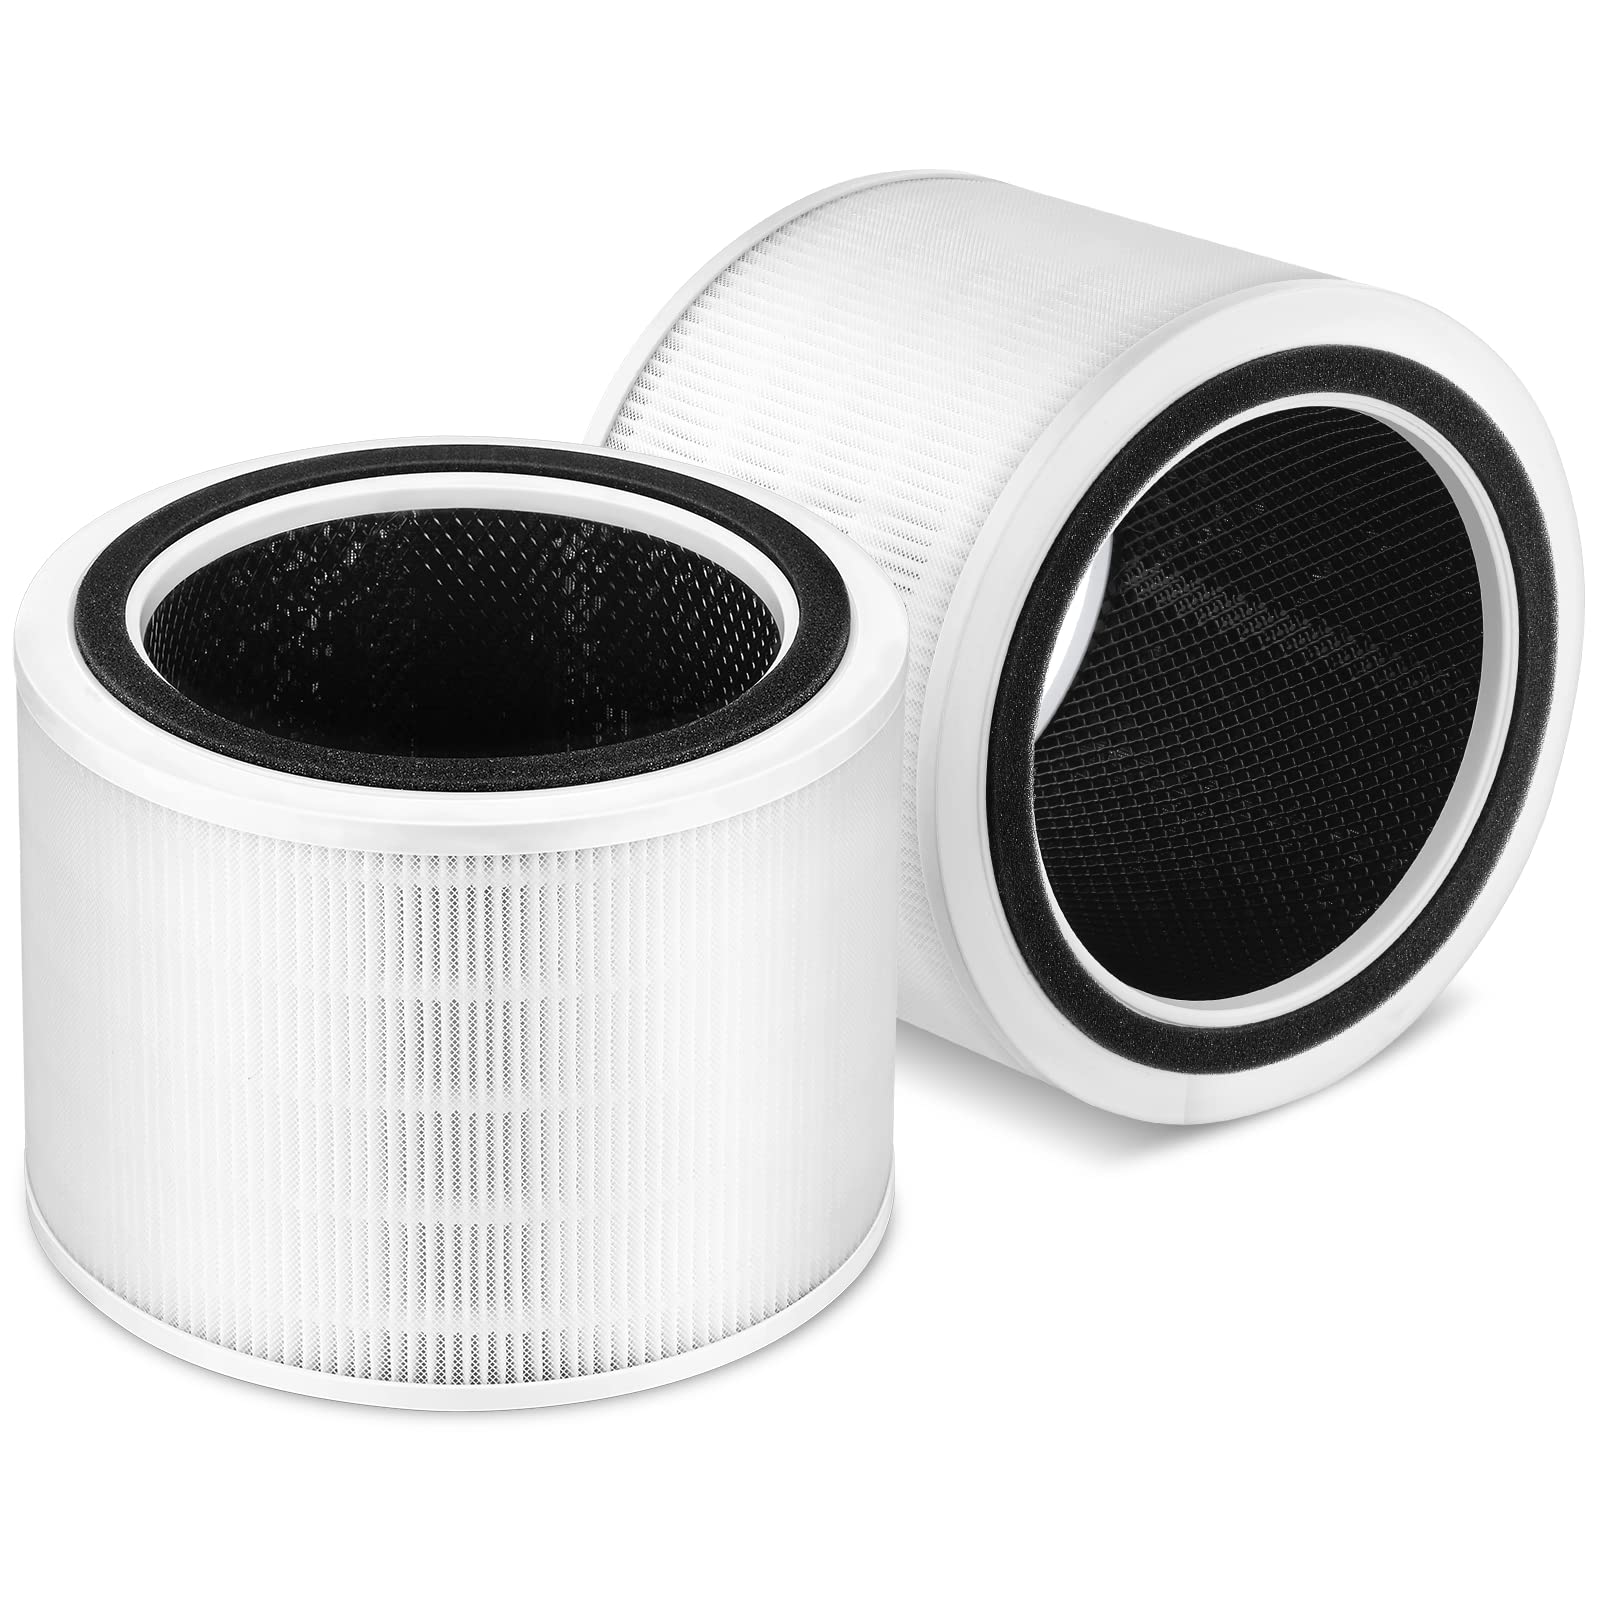 2 Pack Core 200S Replacement Filter Compatible with LEVOIT Levoit Core 200S Smart WiFi Air Purifier, 3 stages Ture H13 HEPA Filter, Compare part# Core 200S-RF